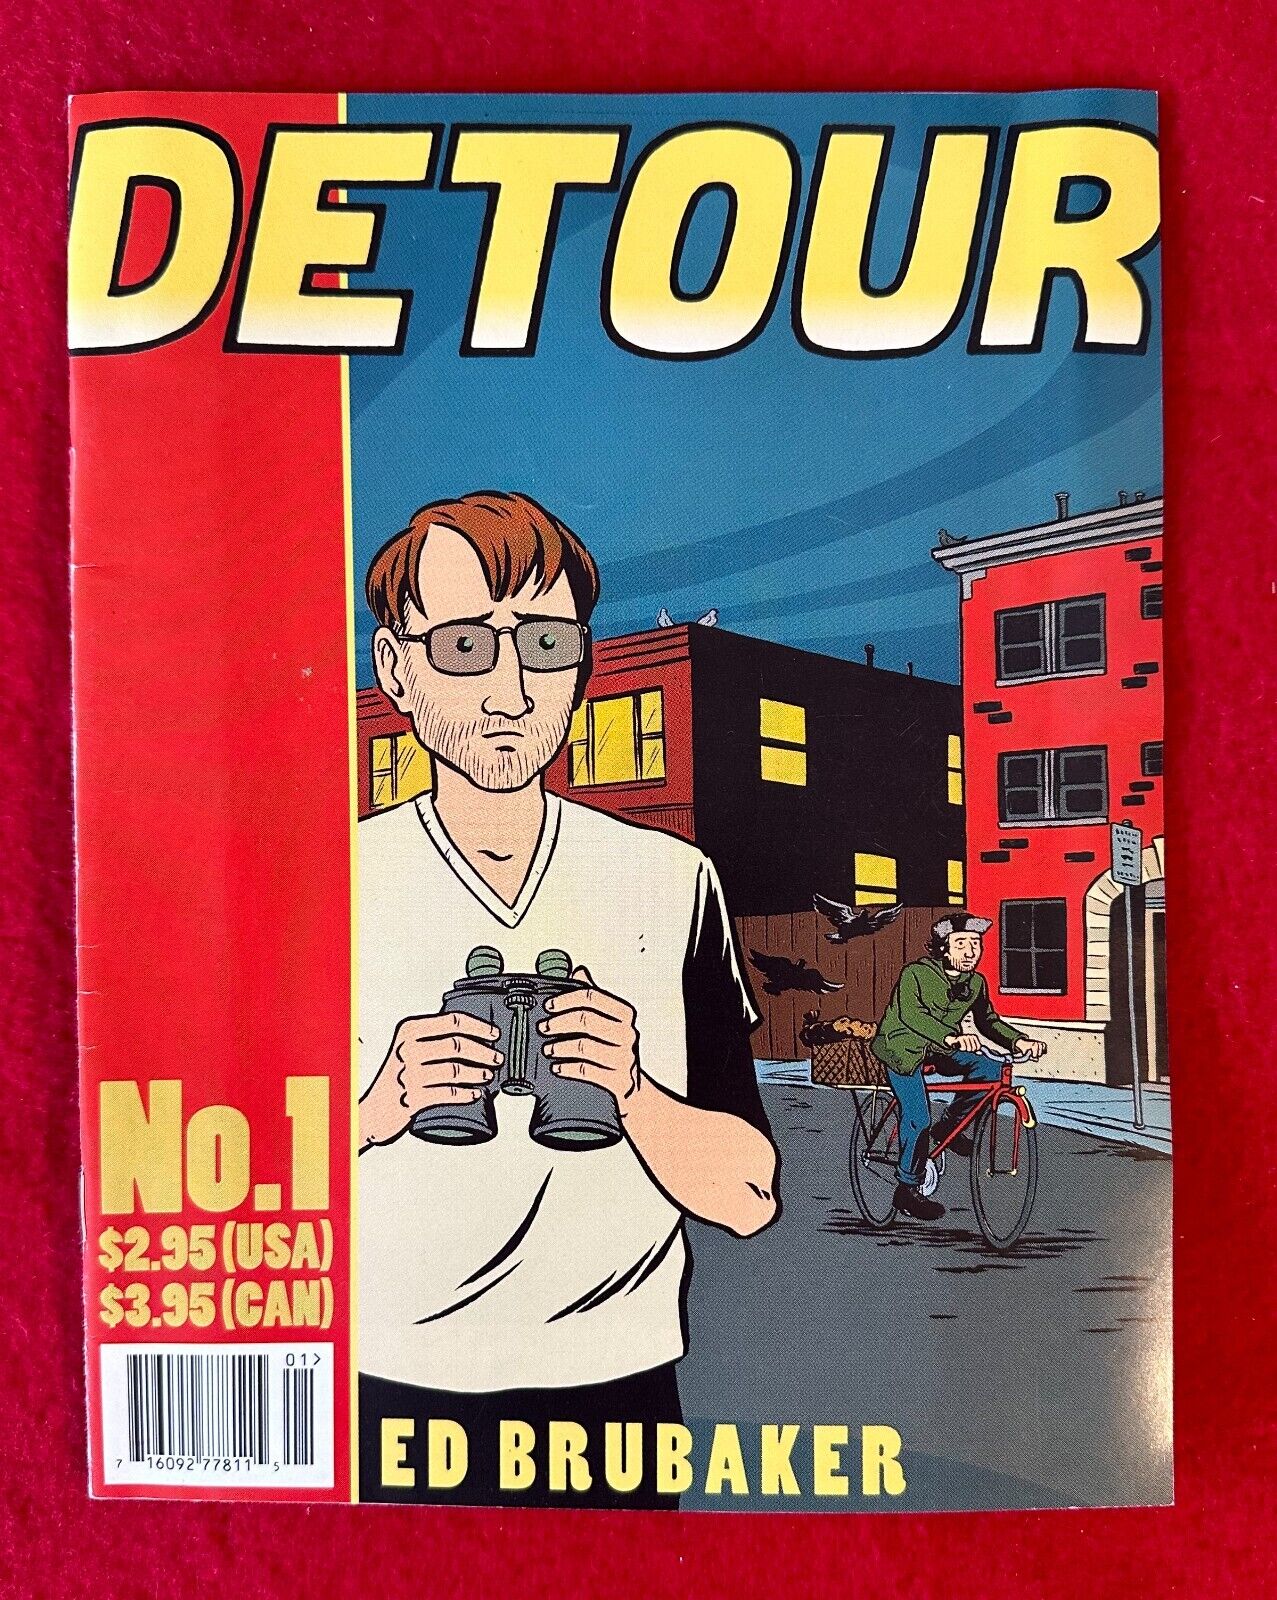 DETOUR Comic No. 1, October 1997 by Ed Brubaker good condition